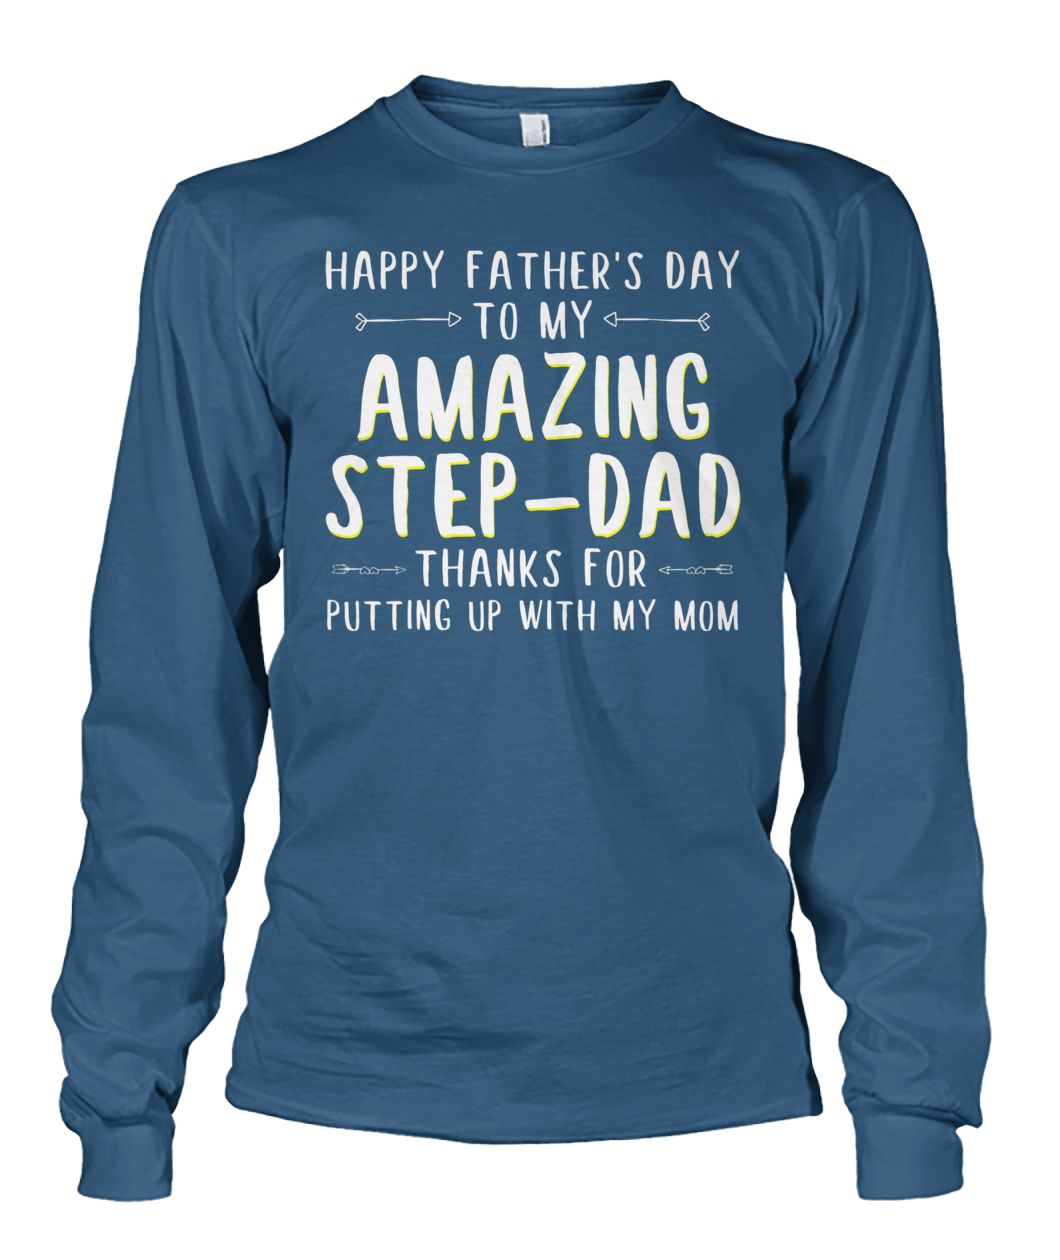 Happy father's day to my amazing step-dad thanks for putting up with my mom unisex long sleeve